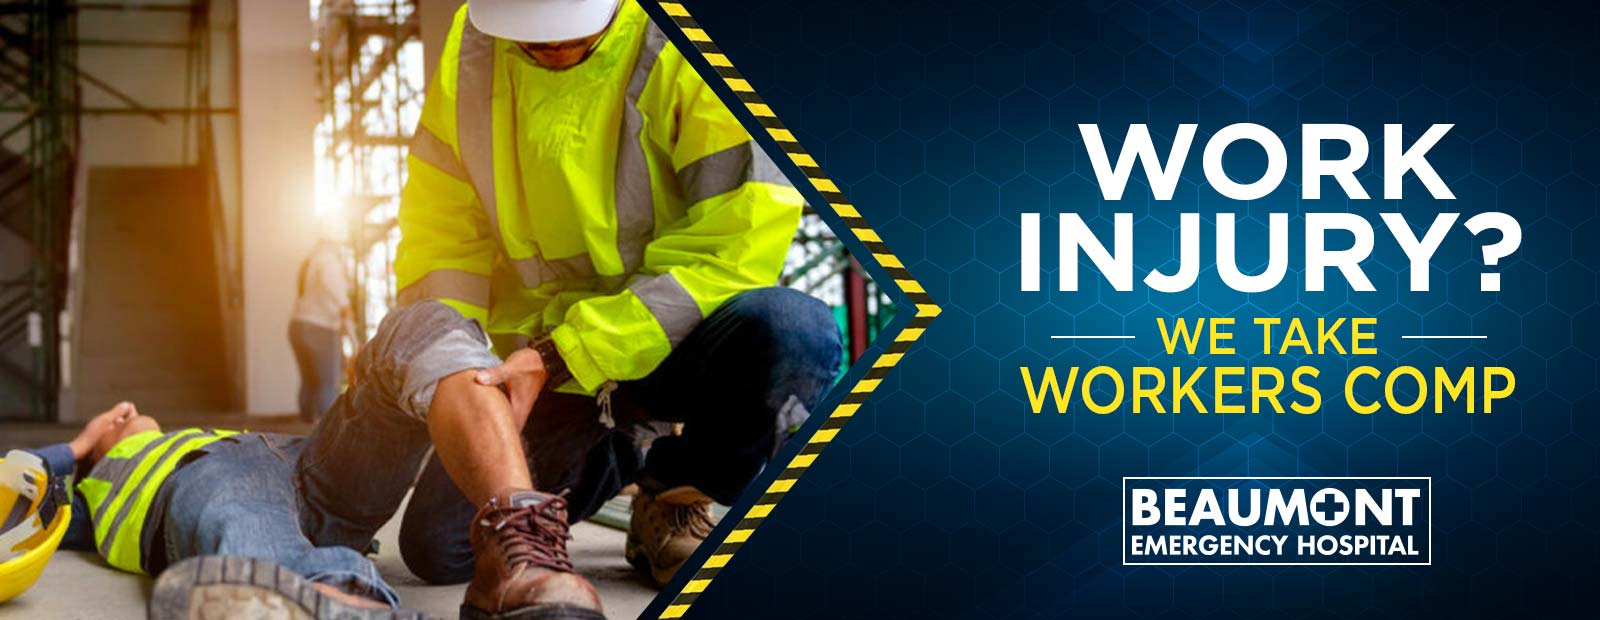 Workplace Injuries - Beaumont Emergency Hospital